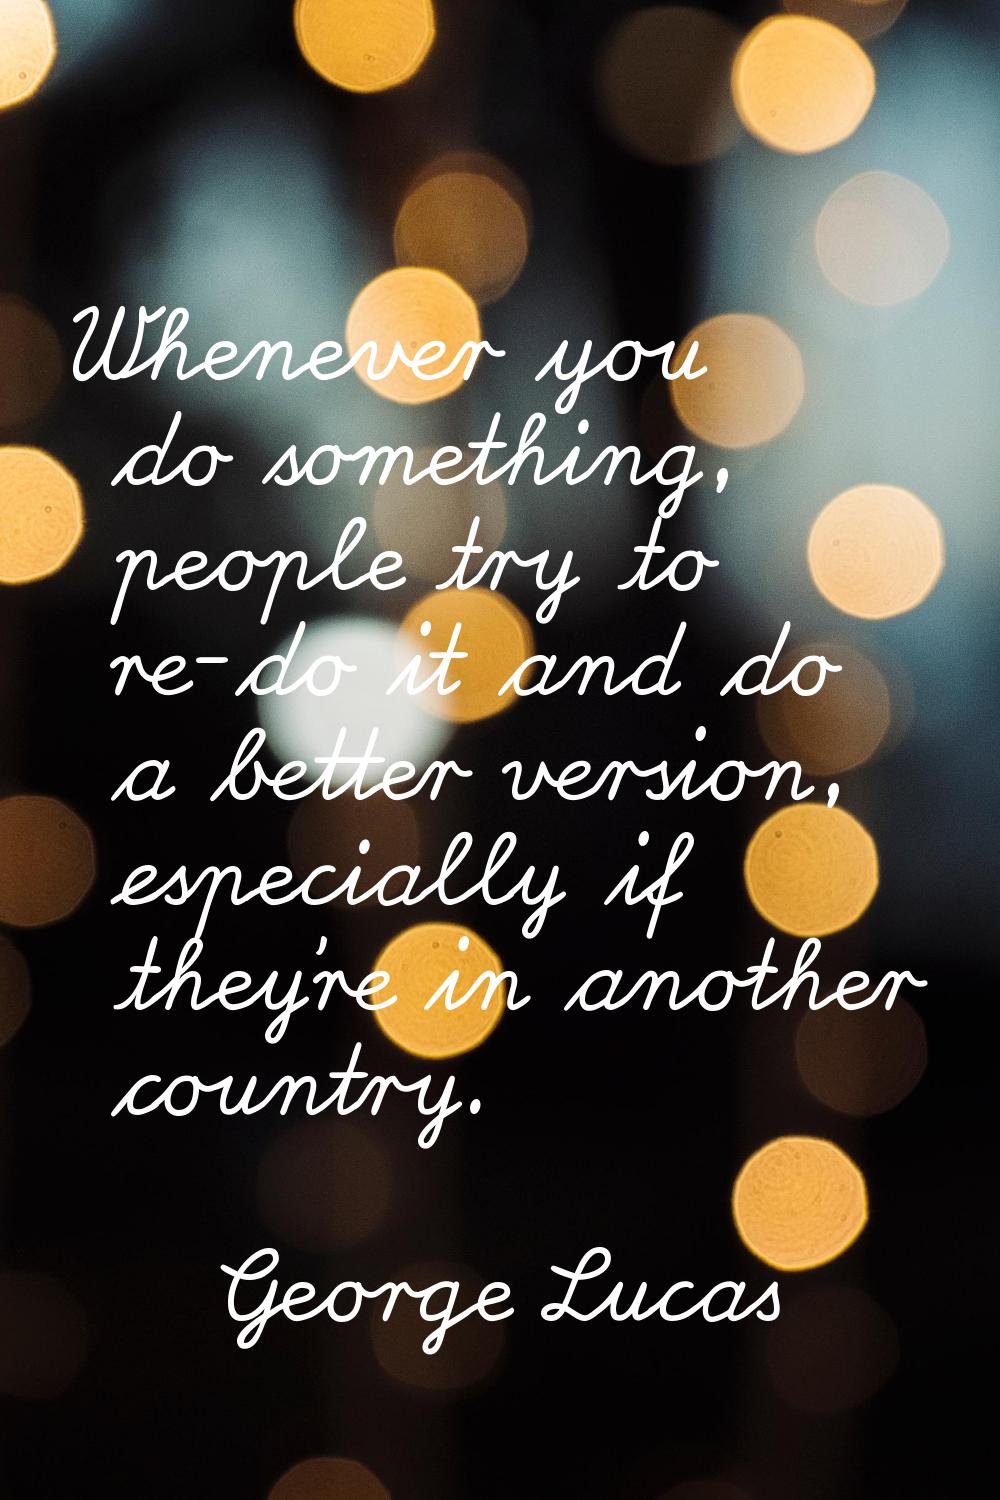 Whenever you do something, people try to re-do it and do a better version, especially if they're in